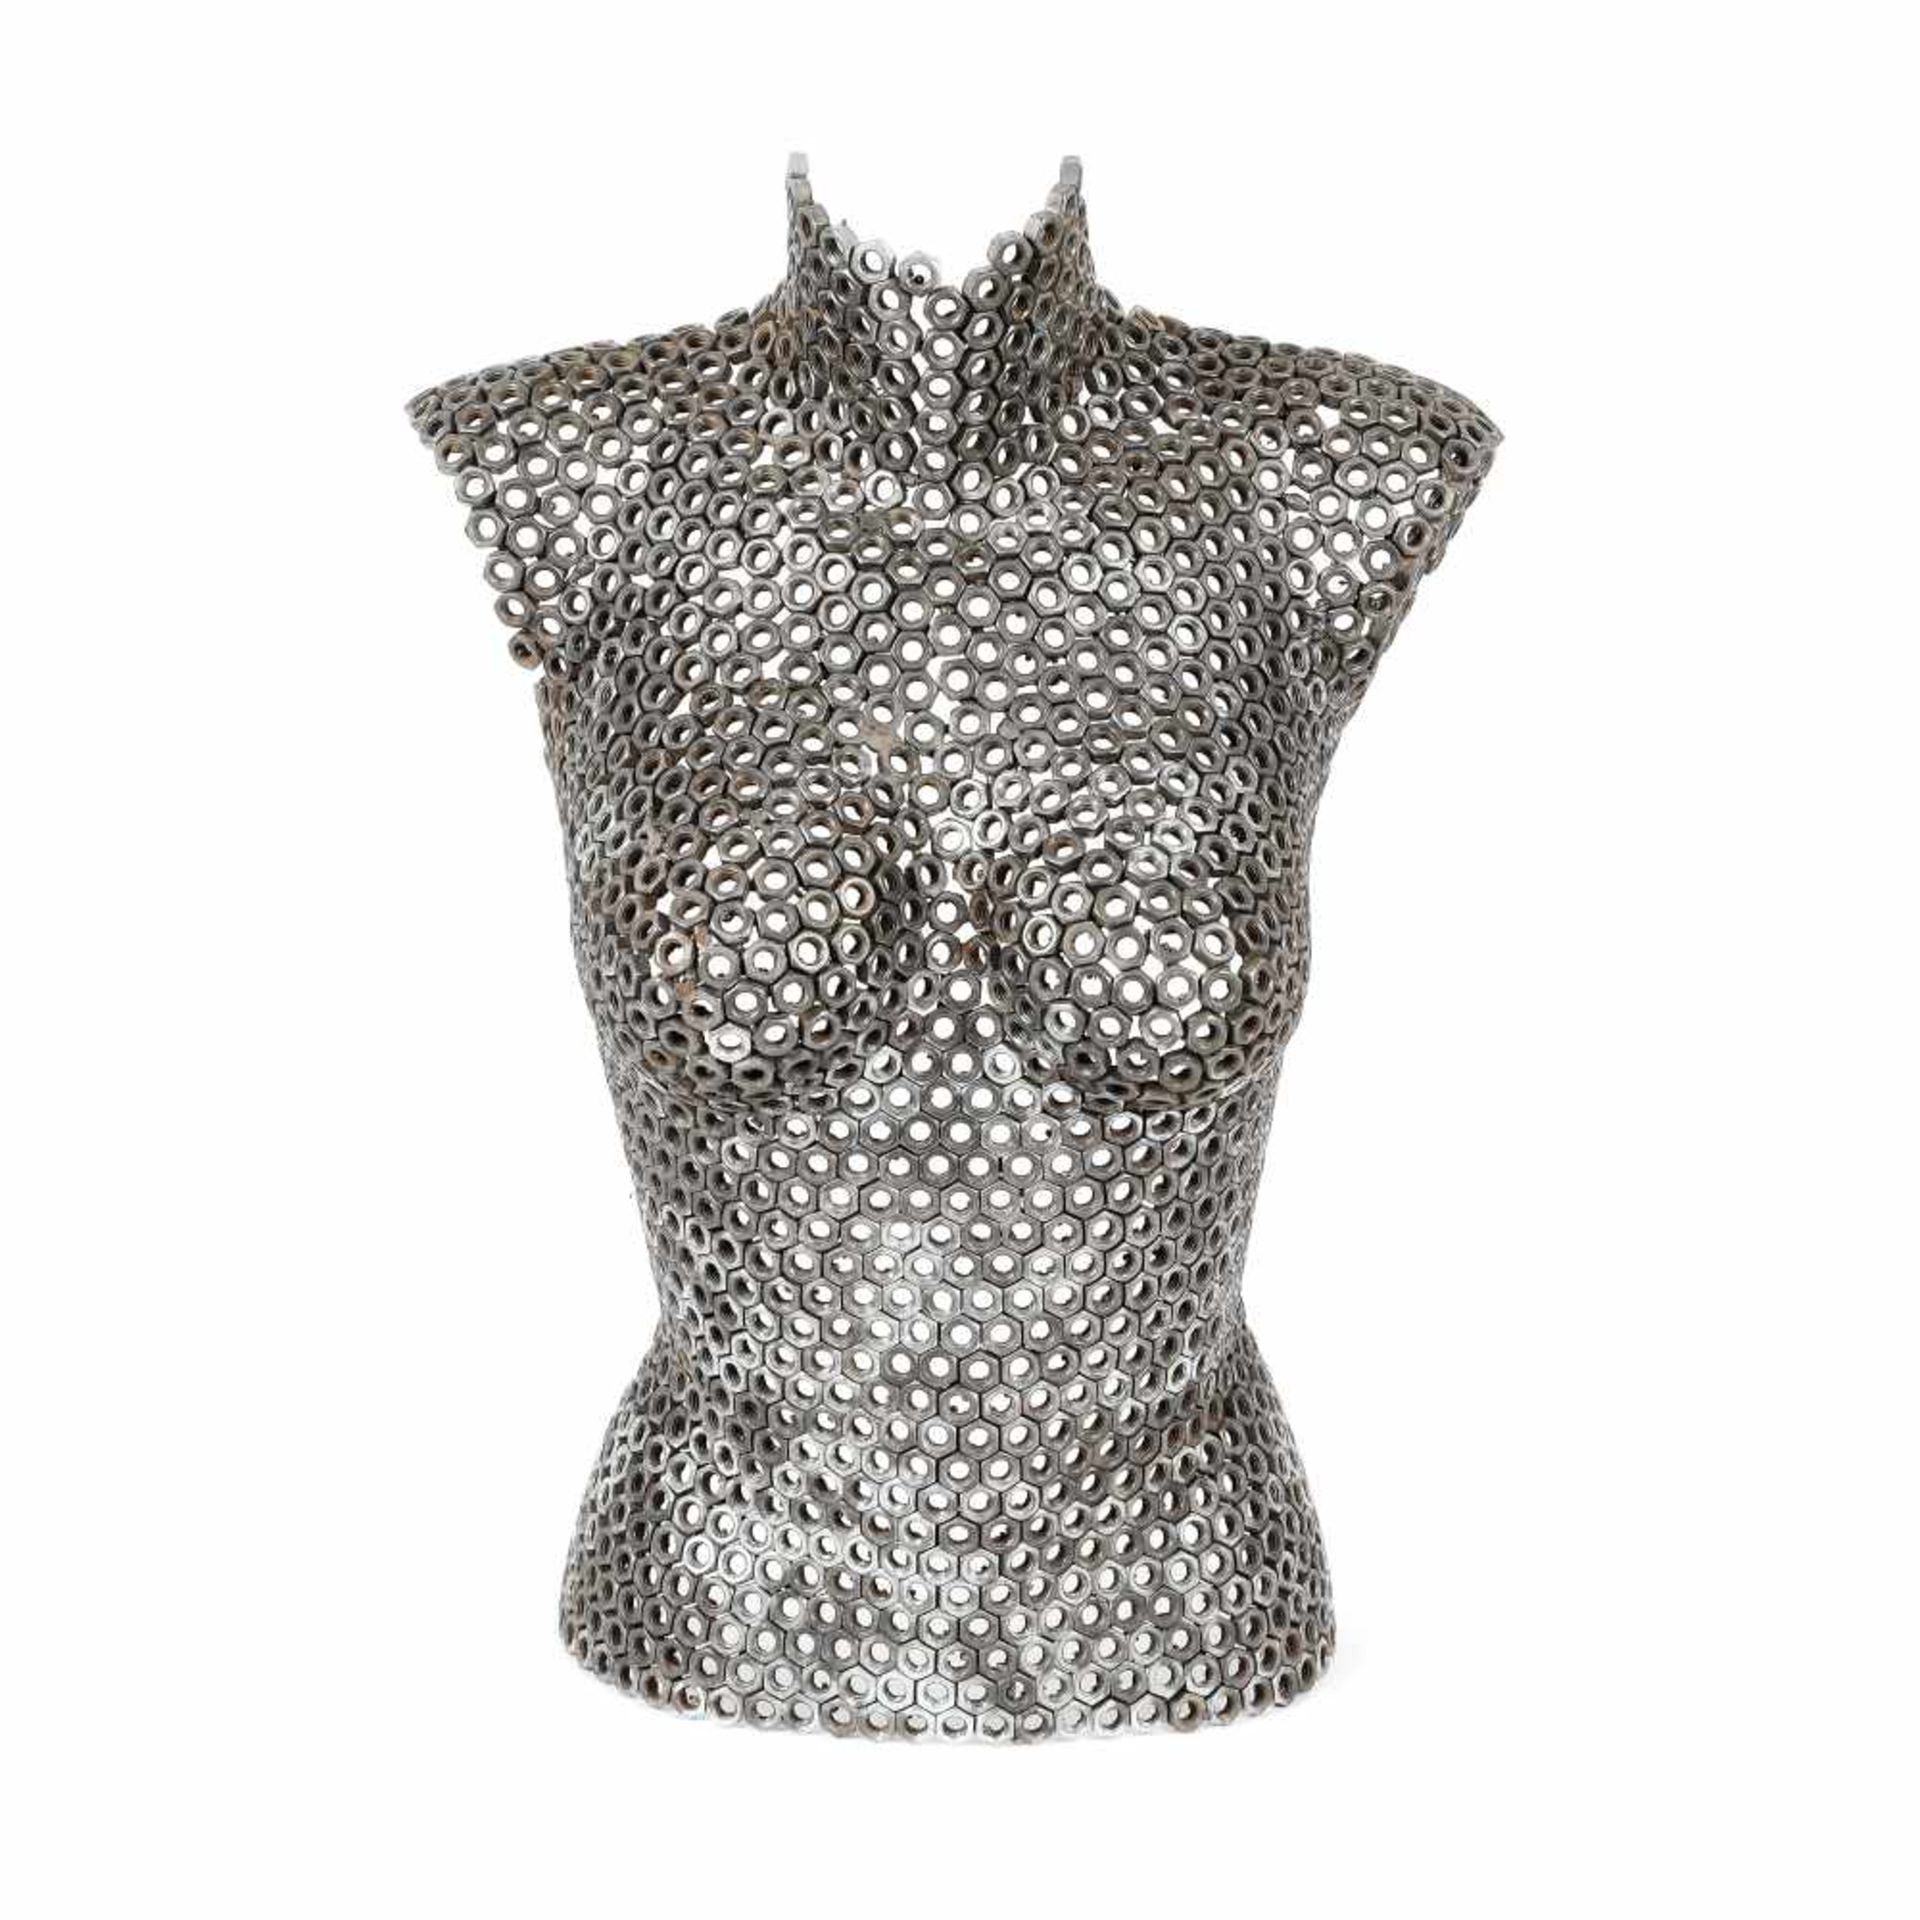 Engineer's muse - unique women's torso made of bolt nuts, 20th century